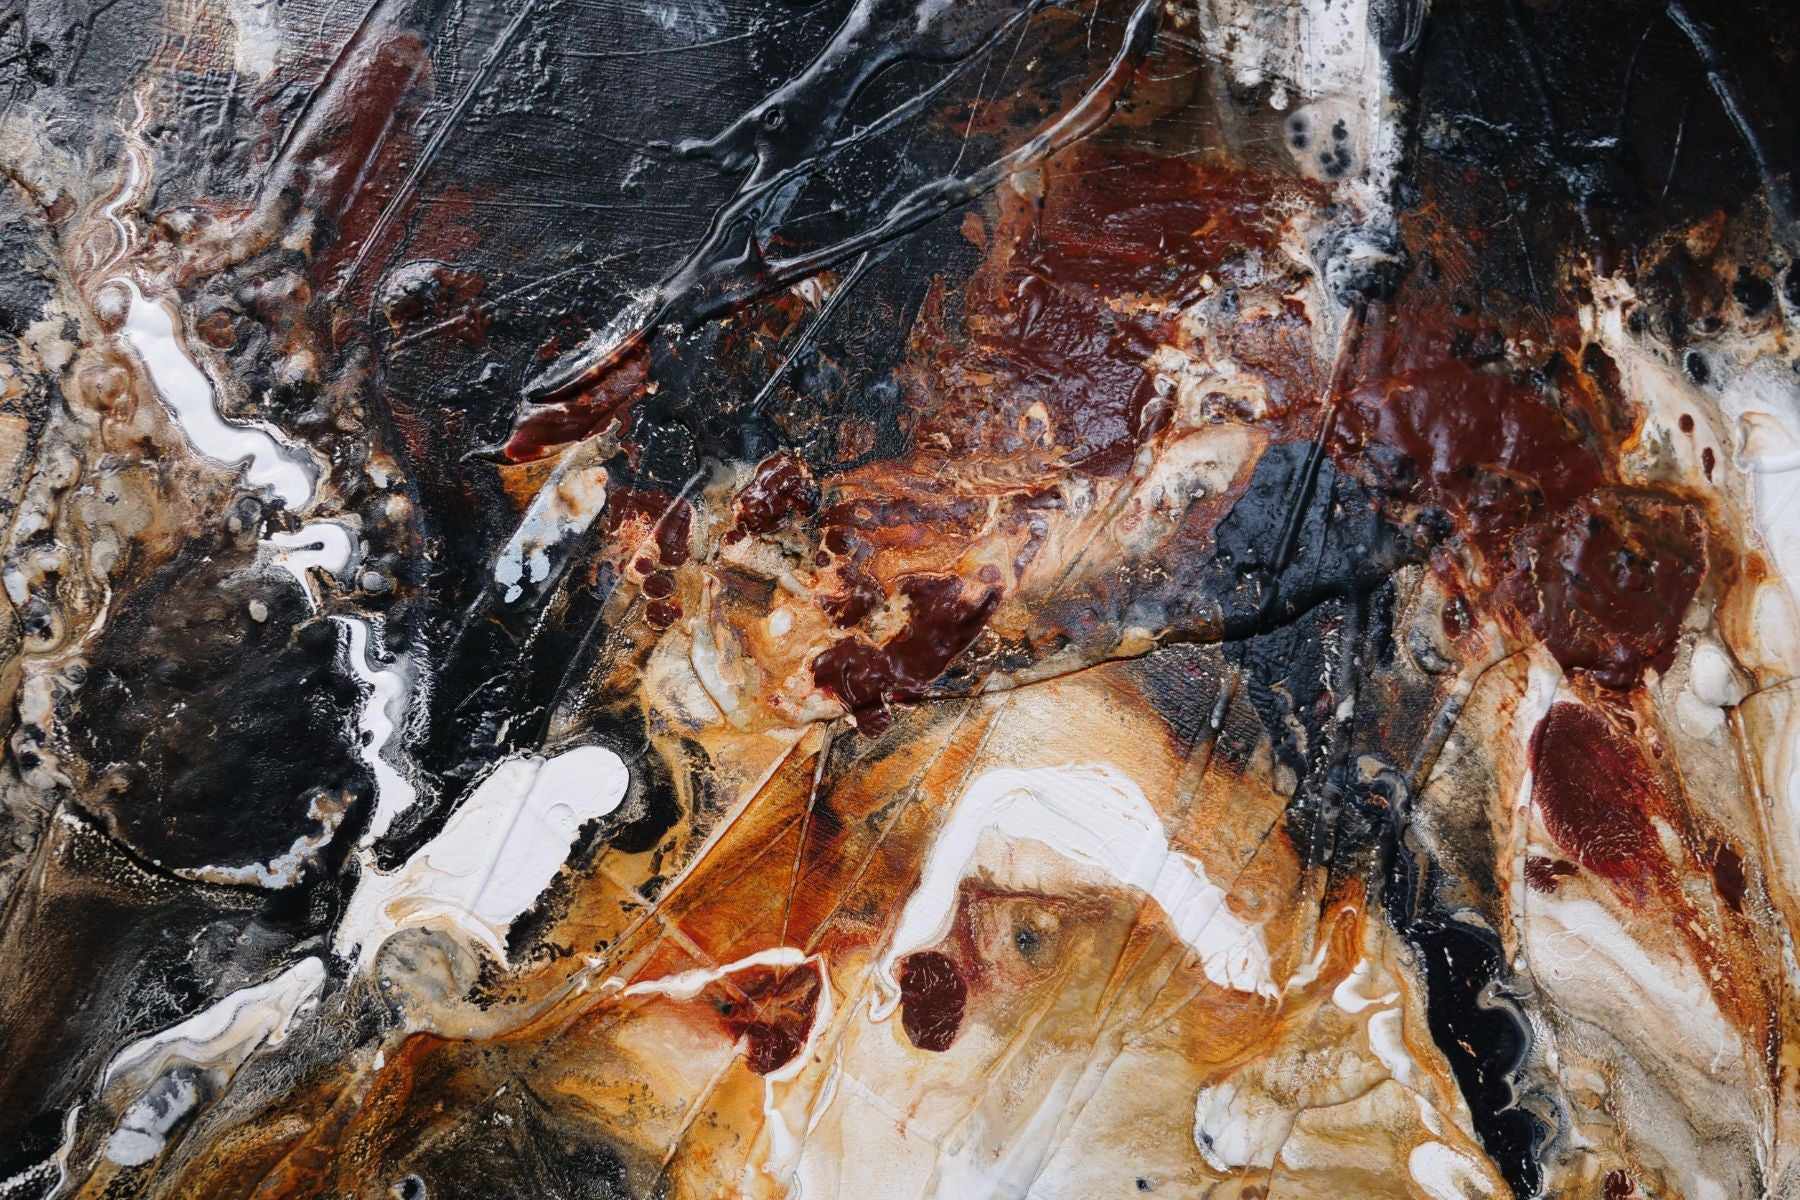 Pangea 270cm x 120cm Black Oxide Rust Textured Abstract Painting (SOLD)